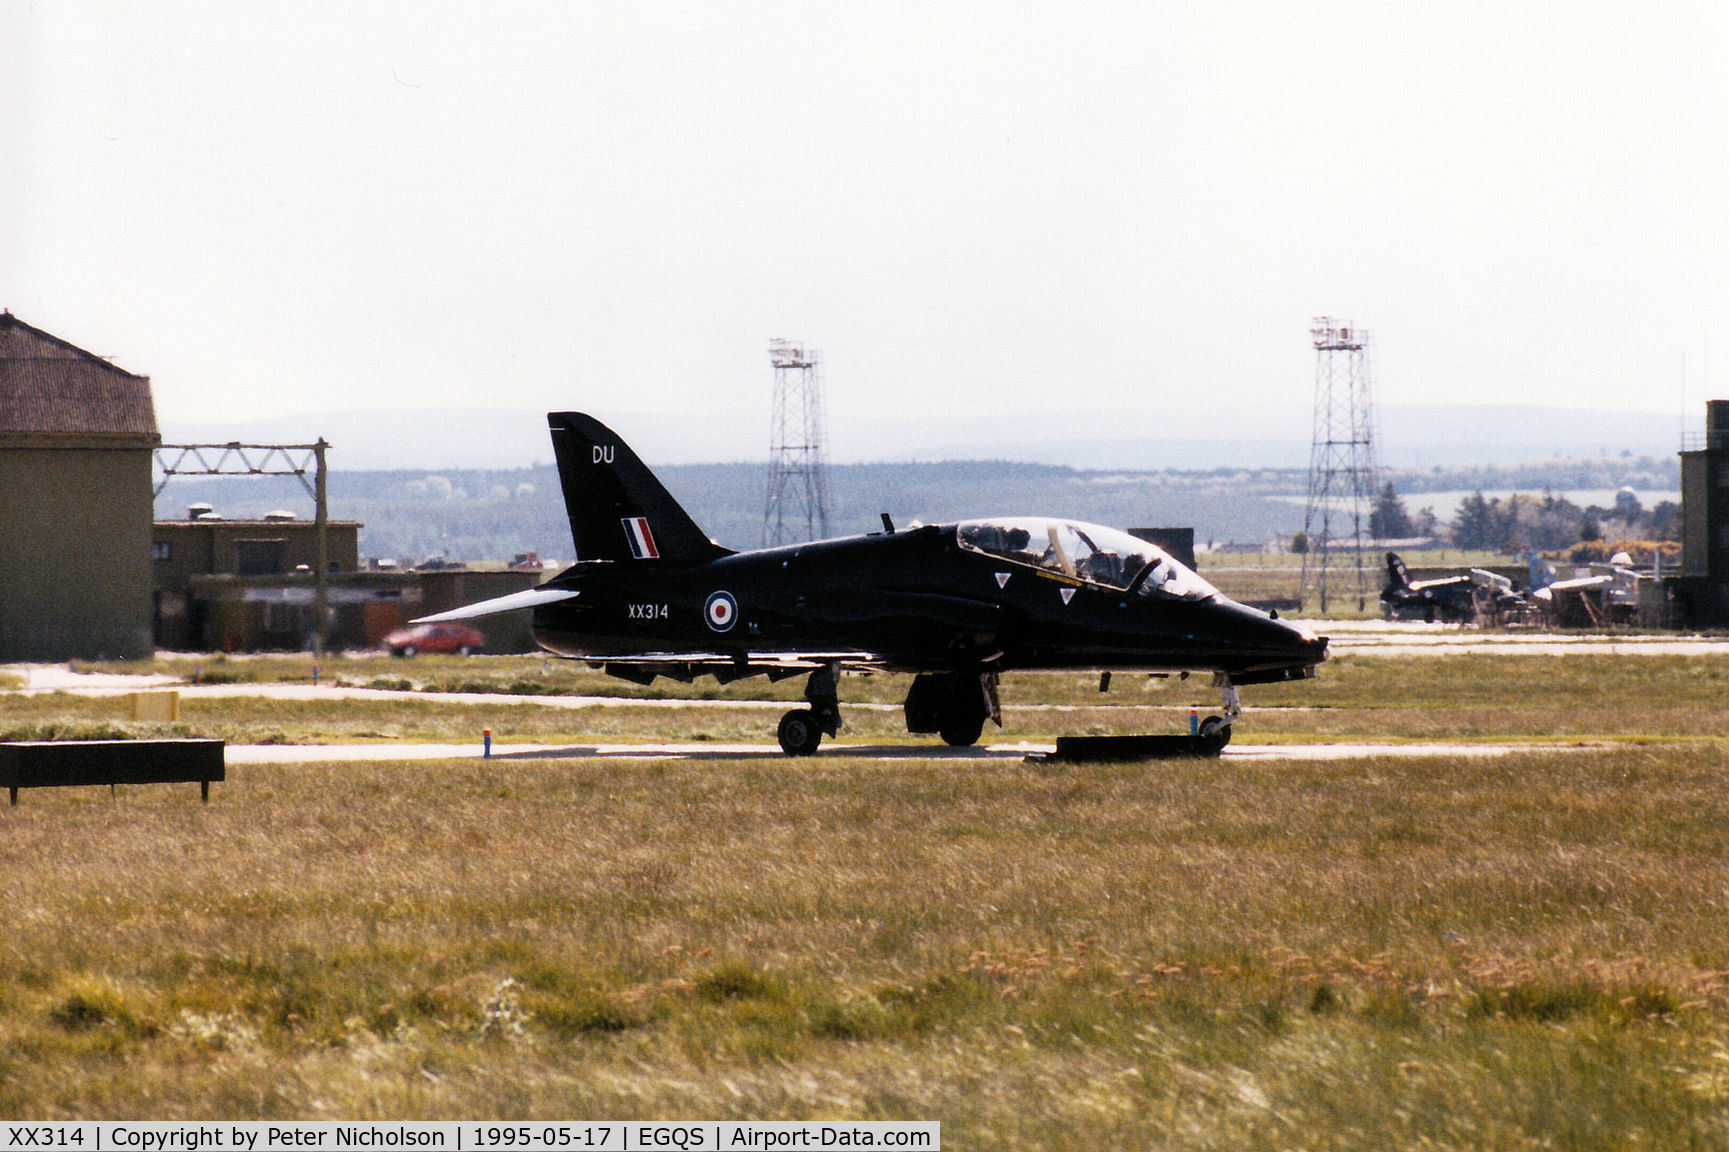 XX314, 1980 Hawker Siddeley Hawk T.1A C/N 150/312139, Hawk T.1A of 208 Squadron taxying to the active runway at RAF Lossiemouth in the Summer of 1995.